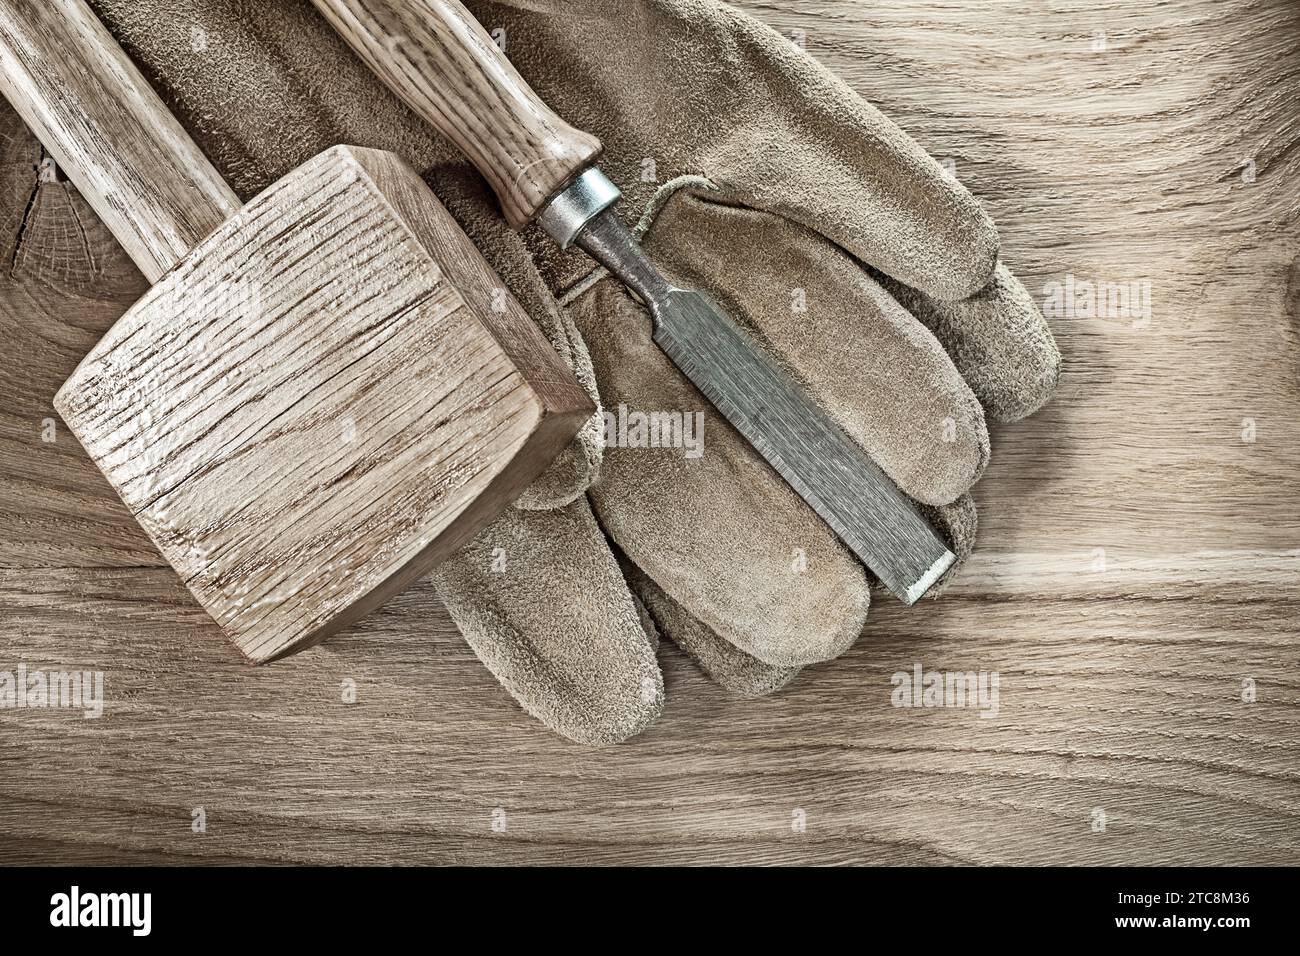 Lump hammer chisel leather protective gloves on wood board Stock Photo